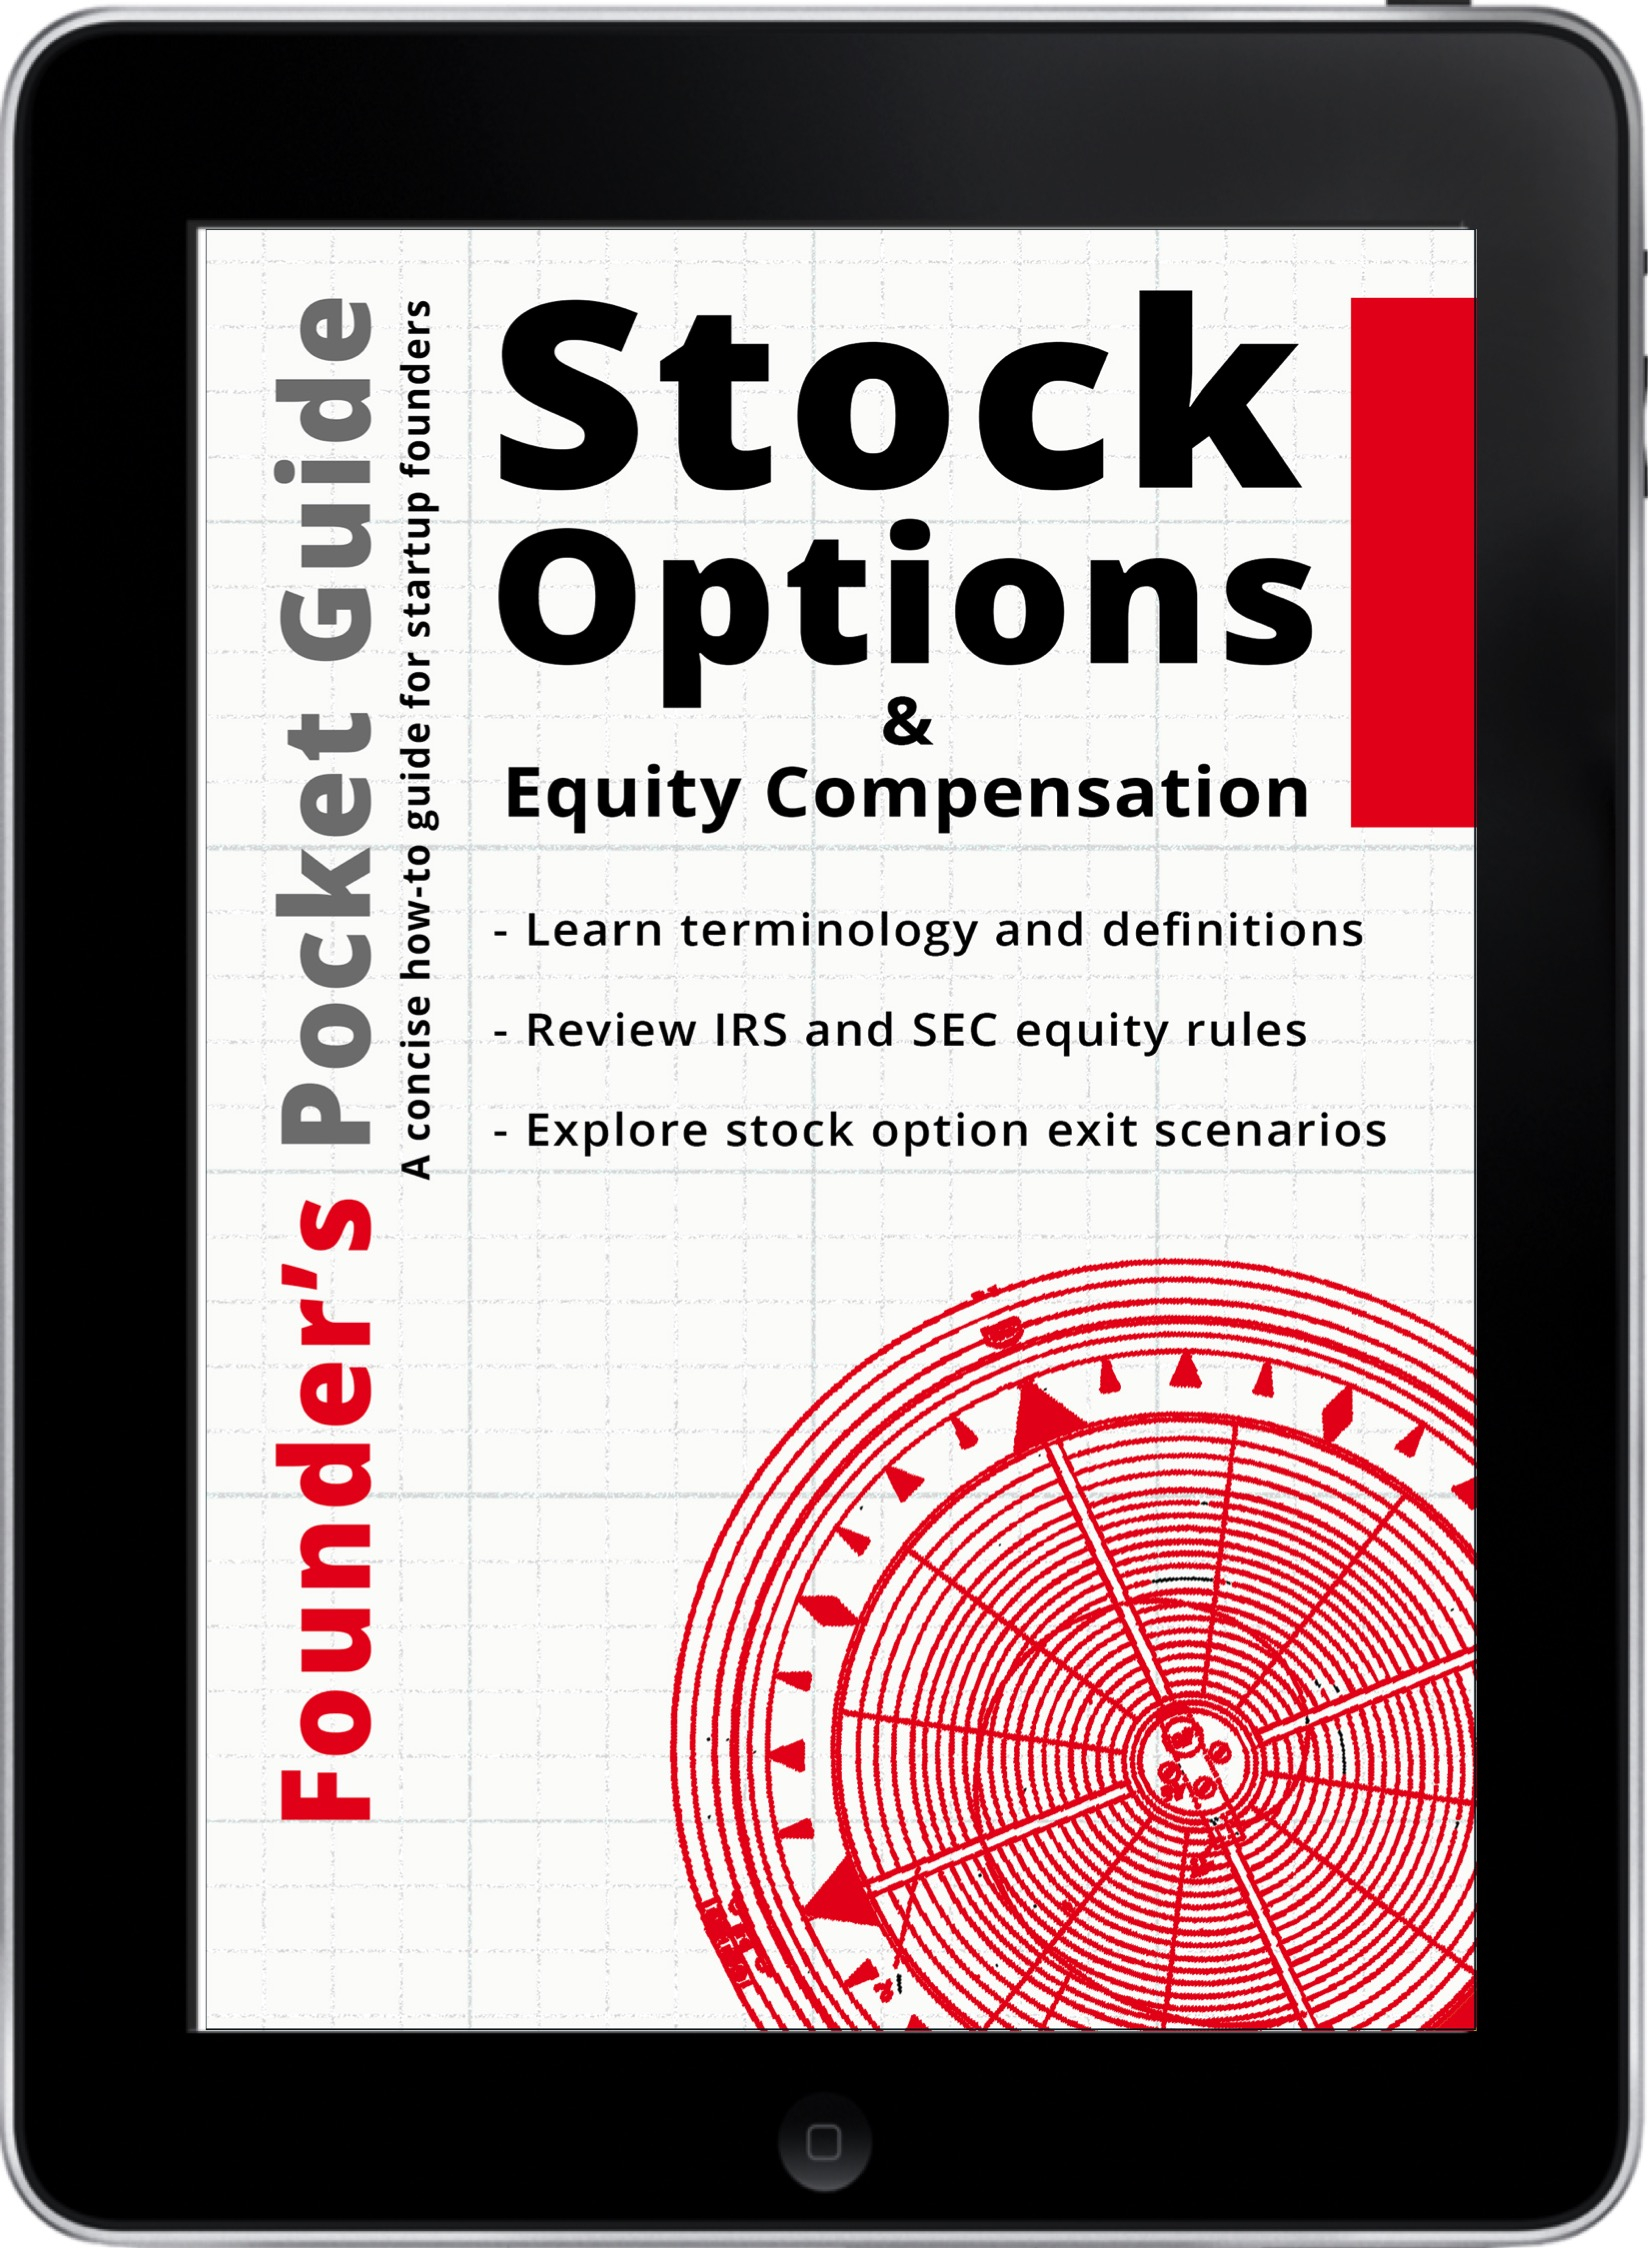 Non Qualified Stock Option Agreement Fpg Stock Options 2018 1x1 Media